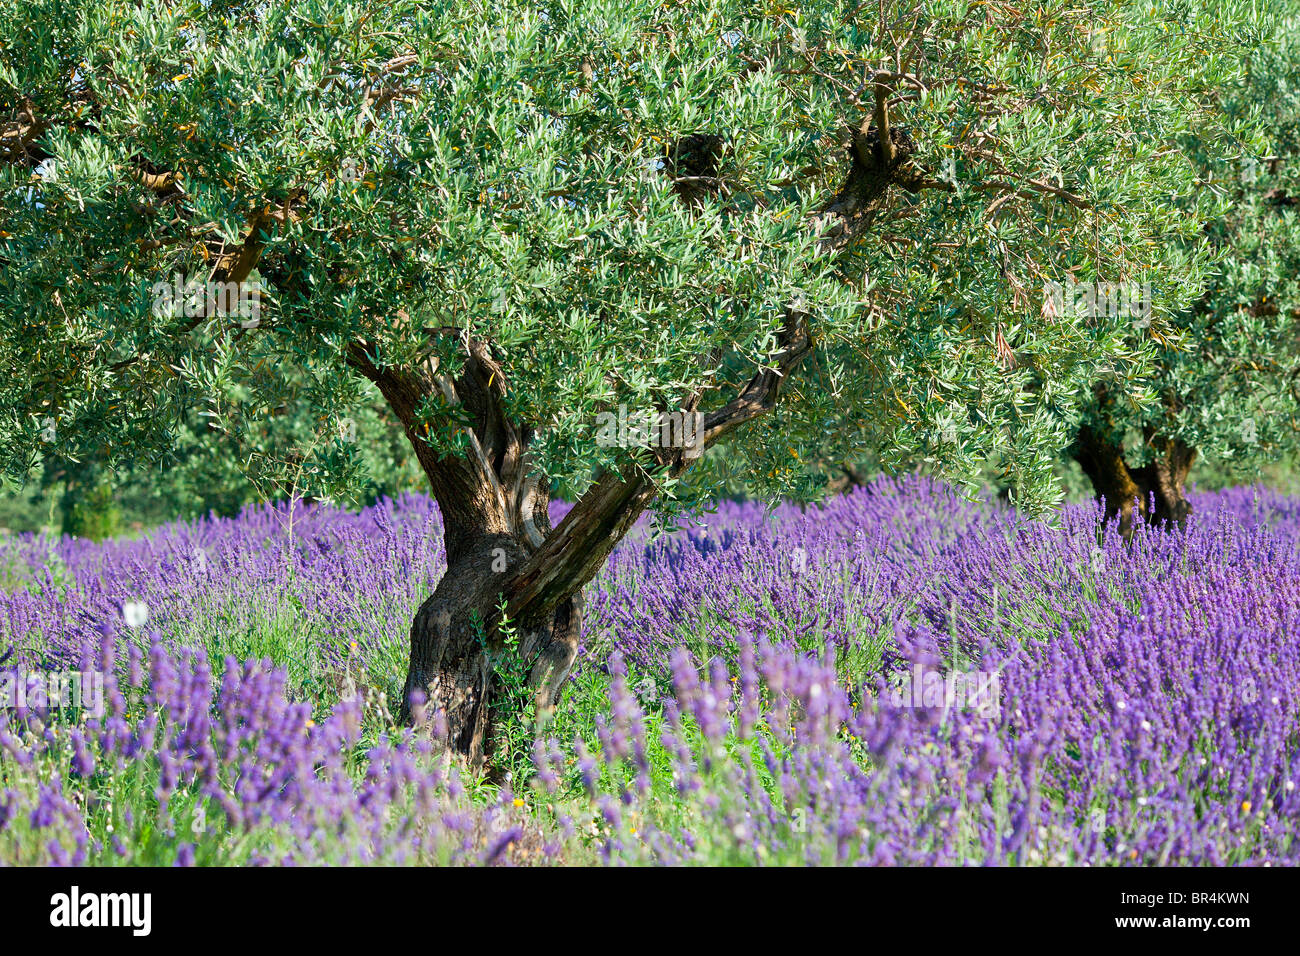 Europe, France, Vaucluse (84), Olive Tree in a lavender field Stock Photo